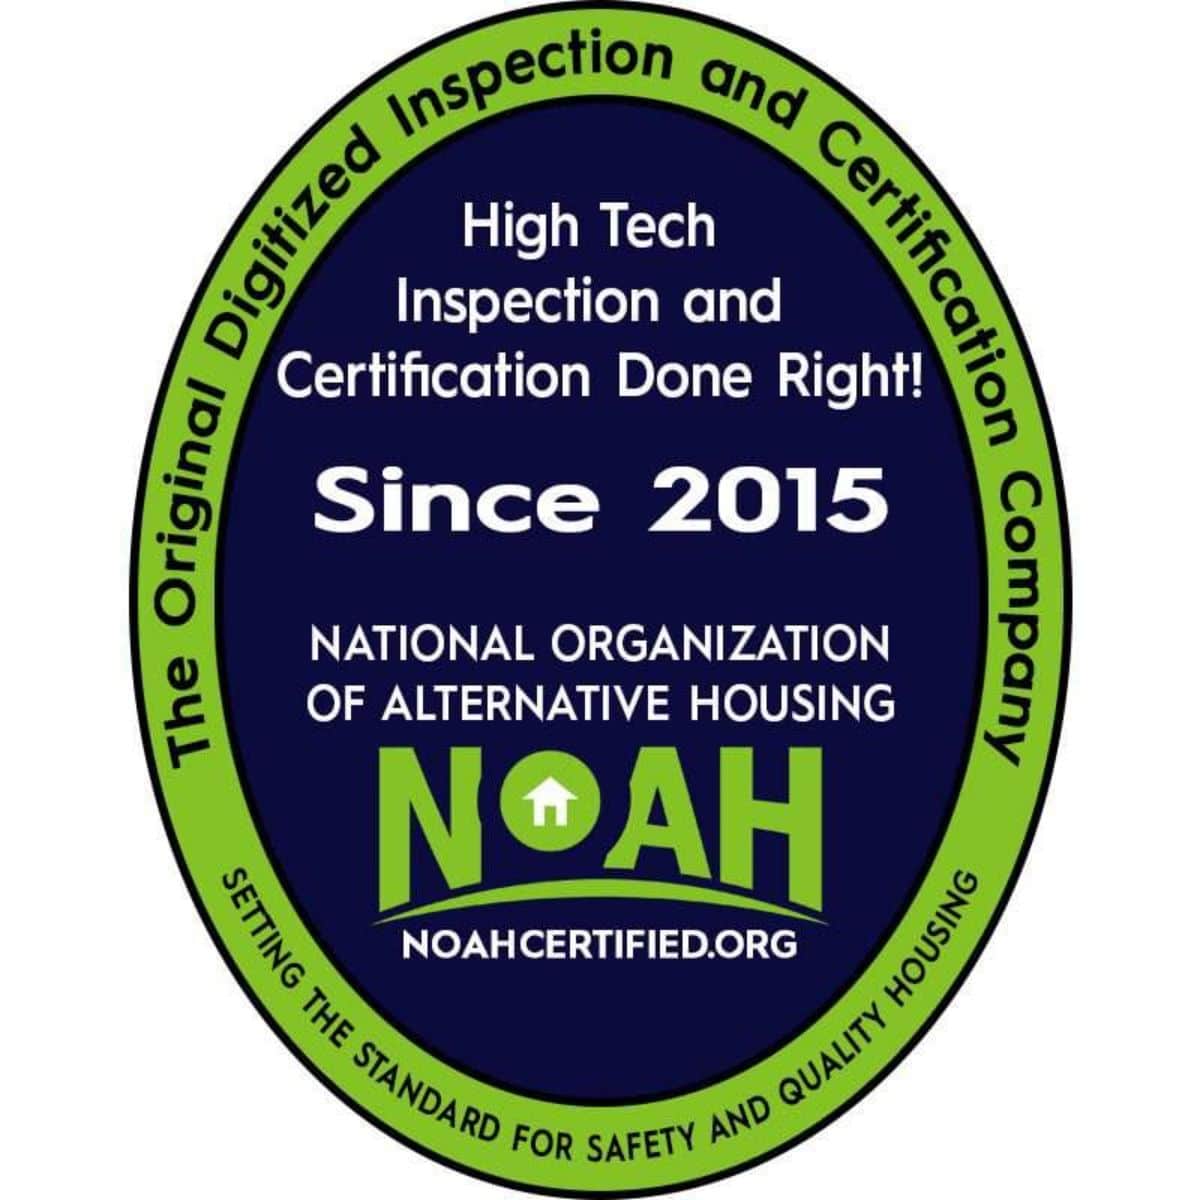 NOAH certification tag of the house